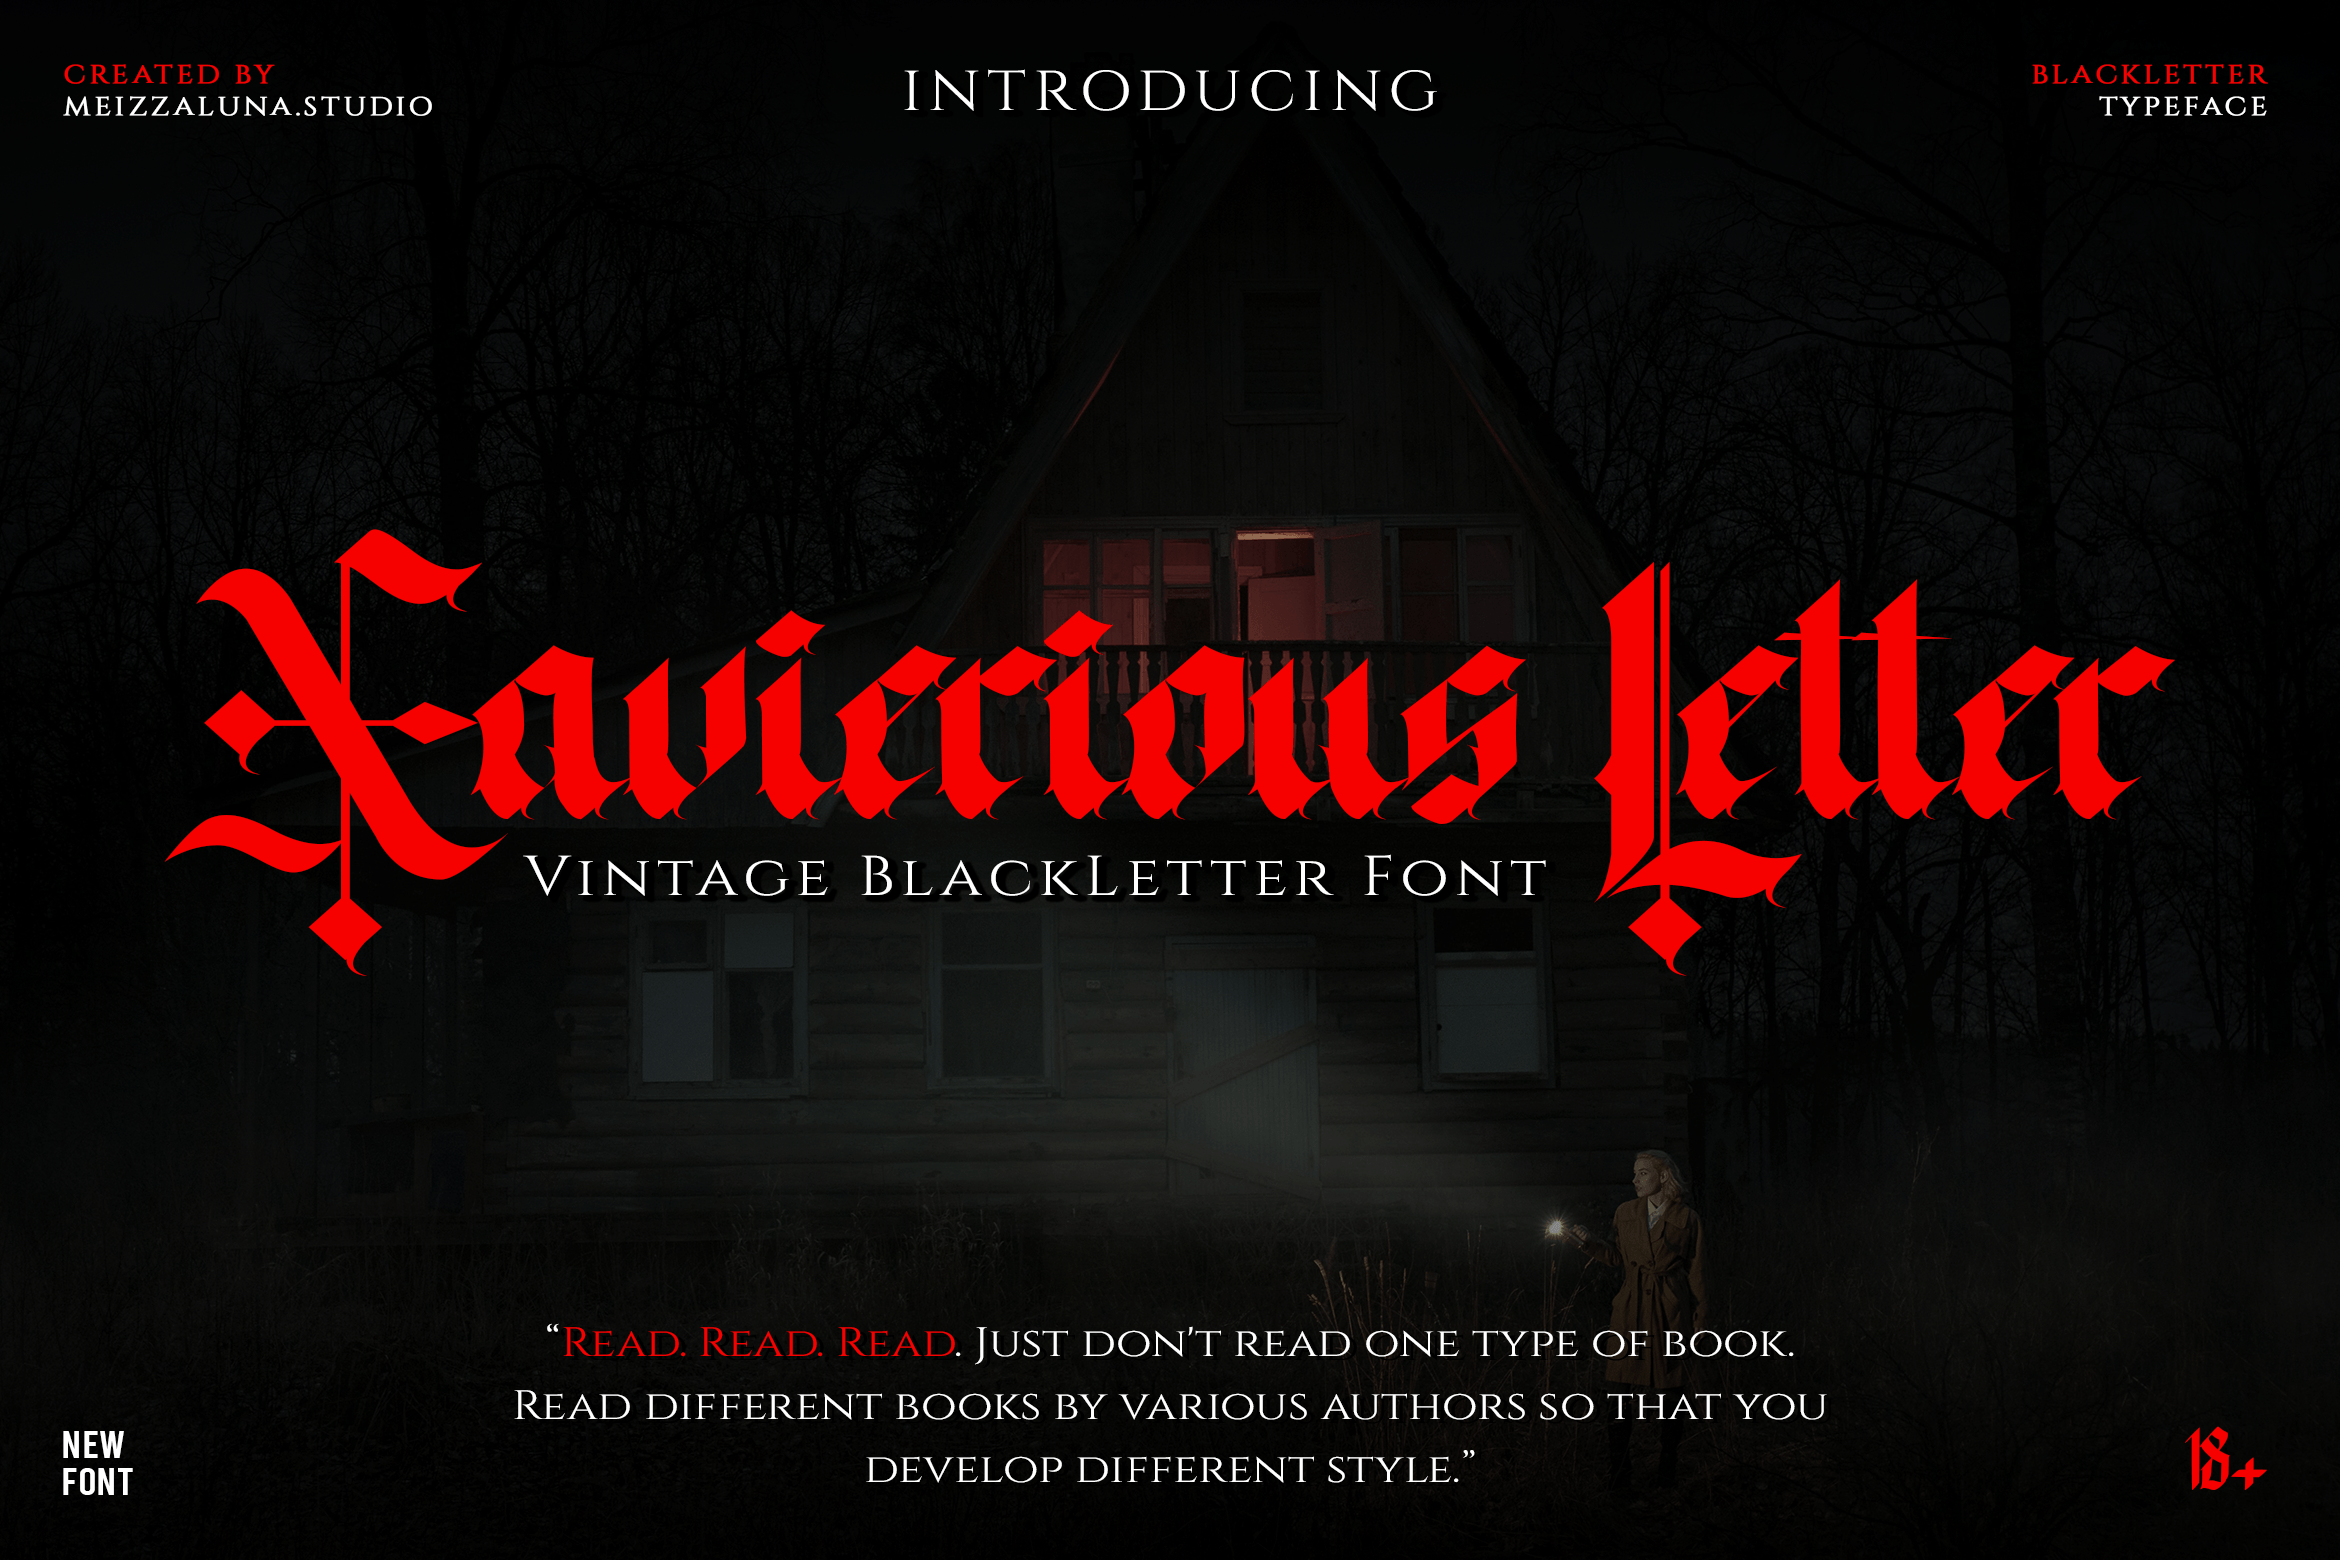 Xavierious Letter font preview image #1